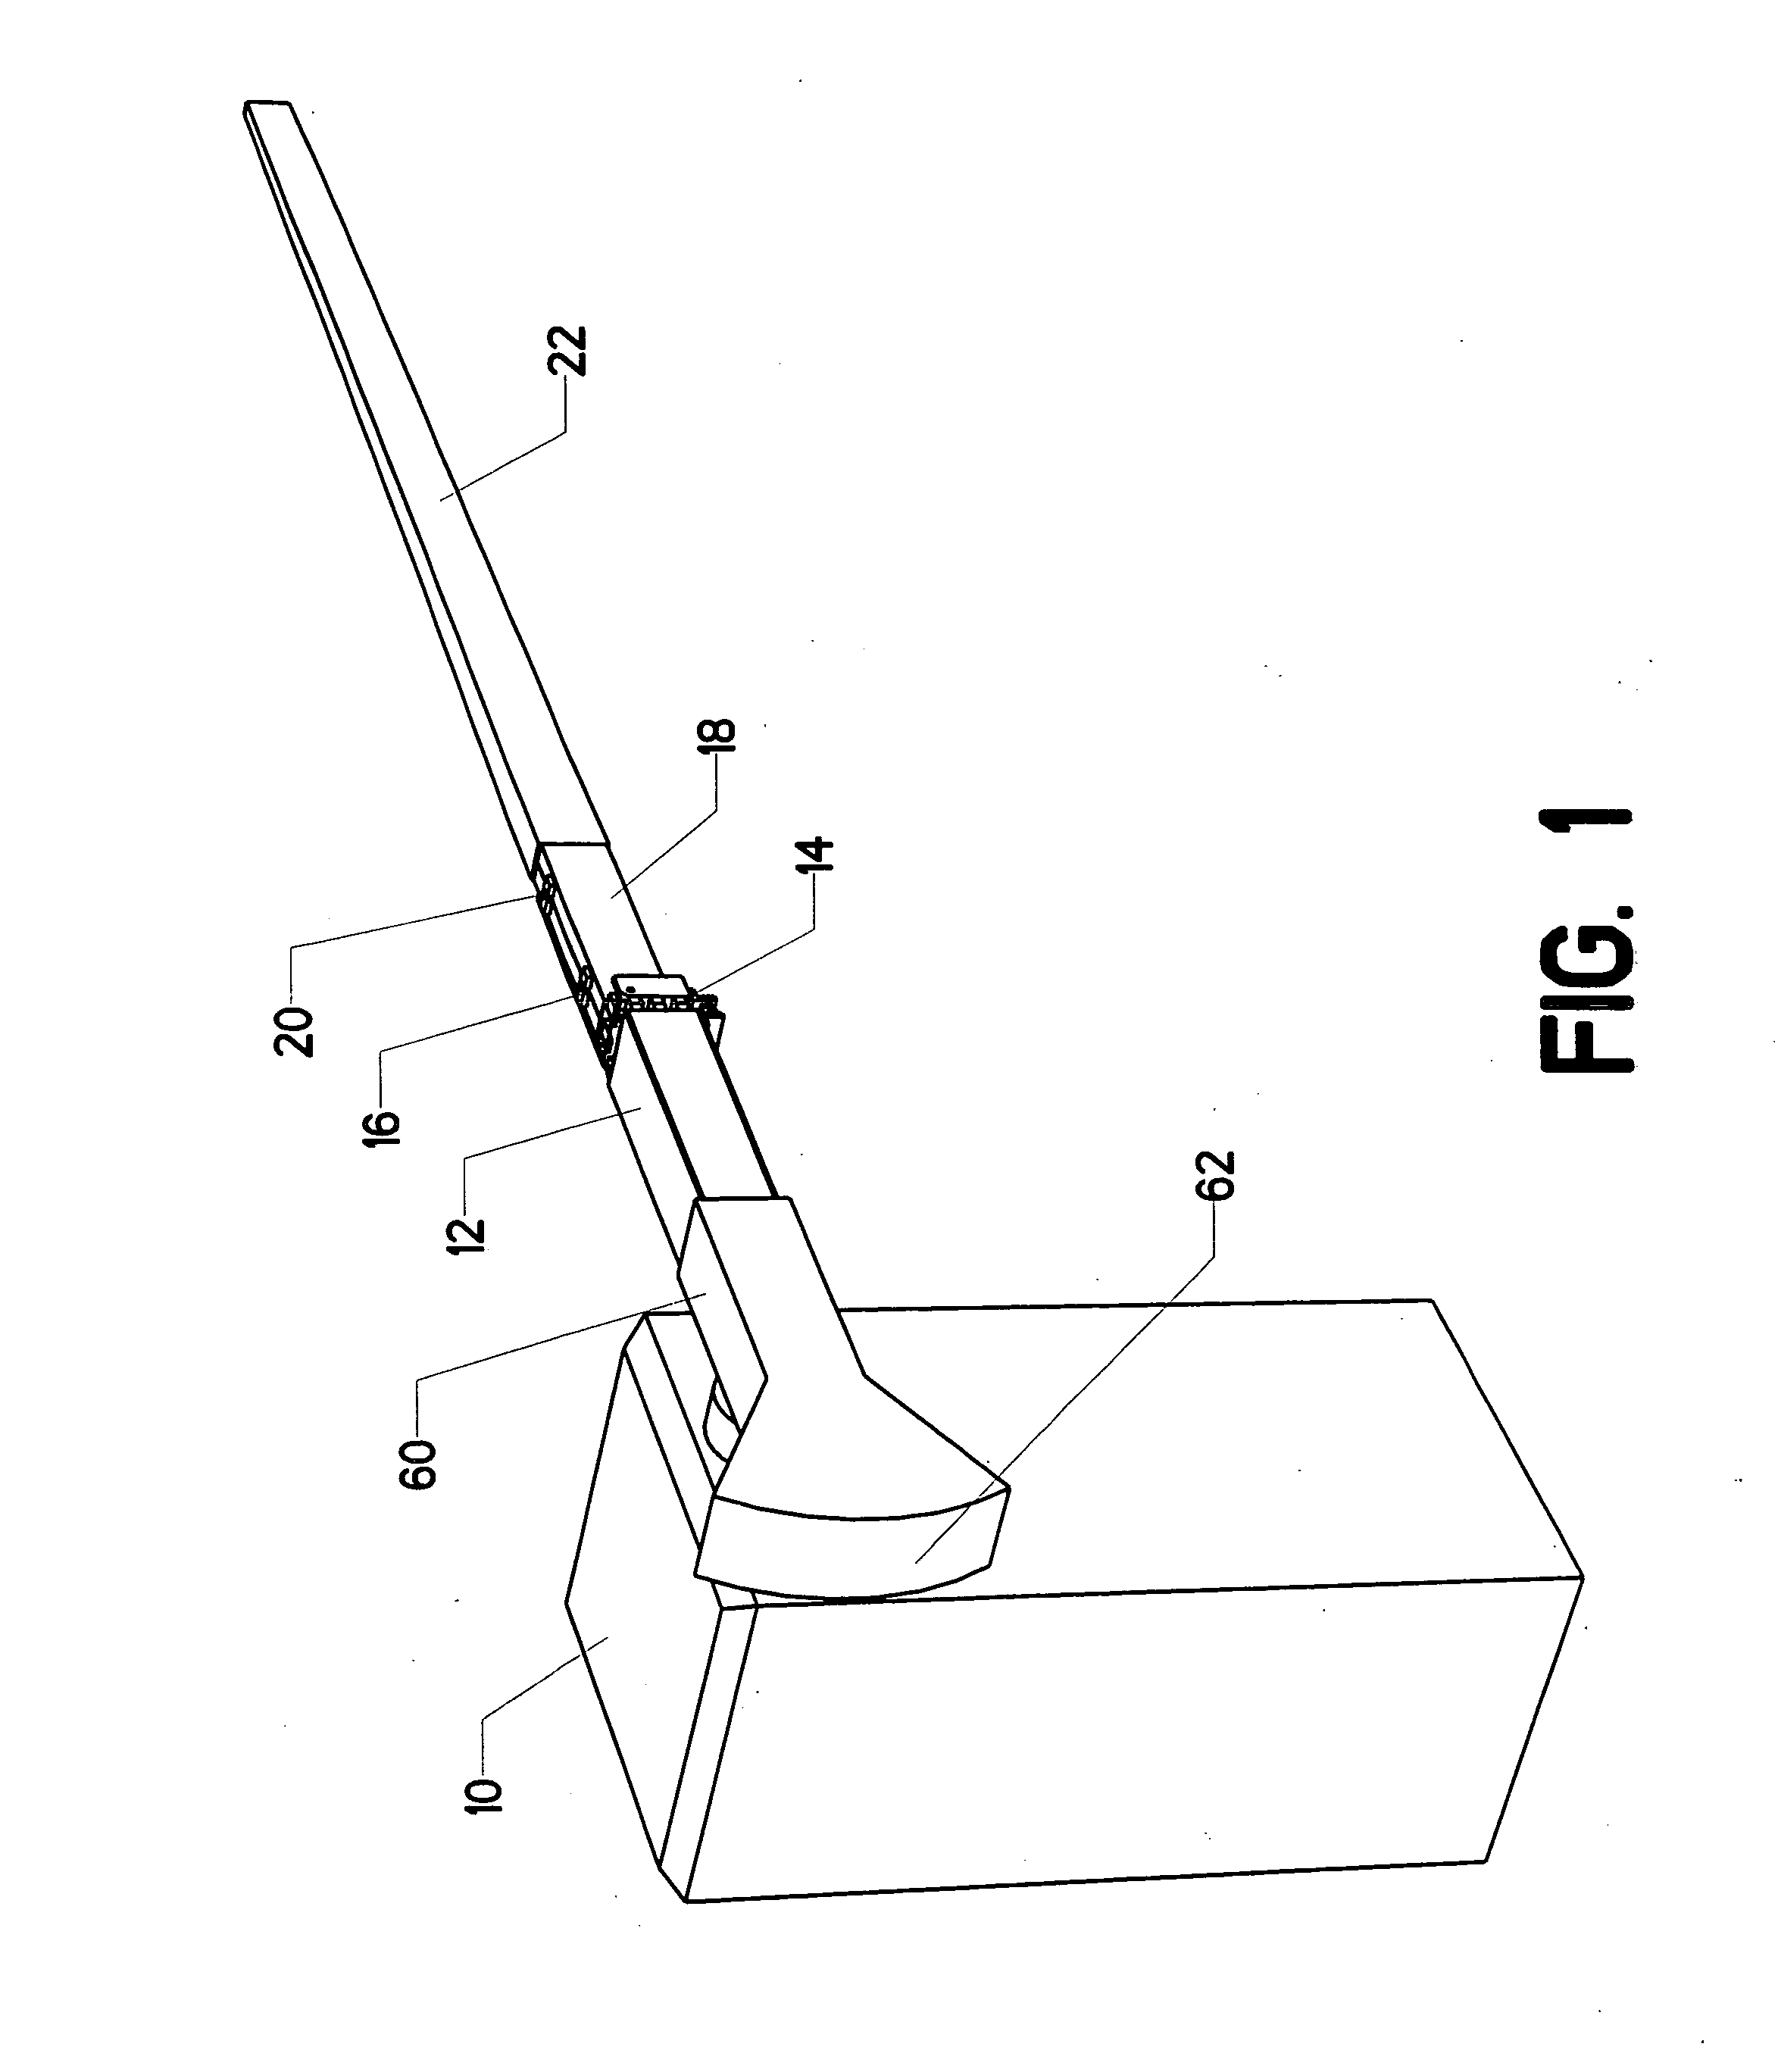 Dual-action breakaway gate safety system